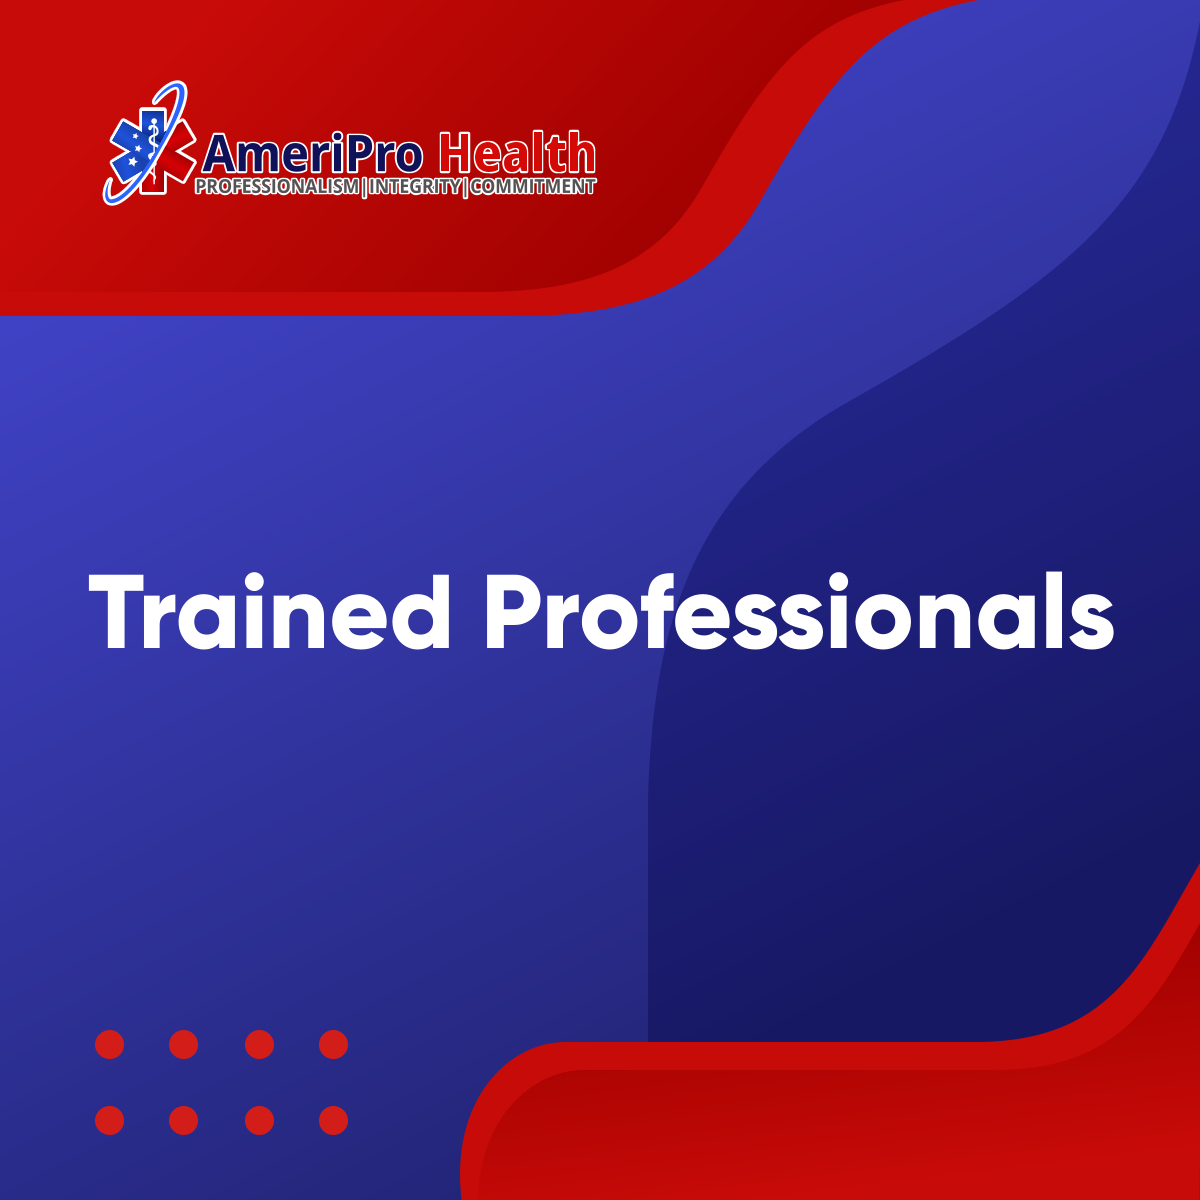 We can assure you that we have highly qualified and skilled personnel on hand to deal with potentially life-threatening scenarios that may arise during transportation. We have trained them well for situations like these. Contact us today if you need our assistance.

#WellTrained